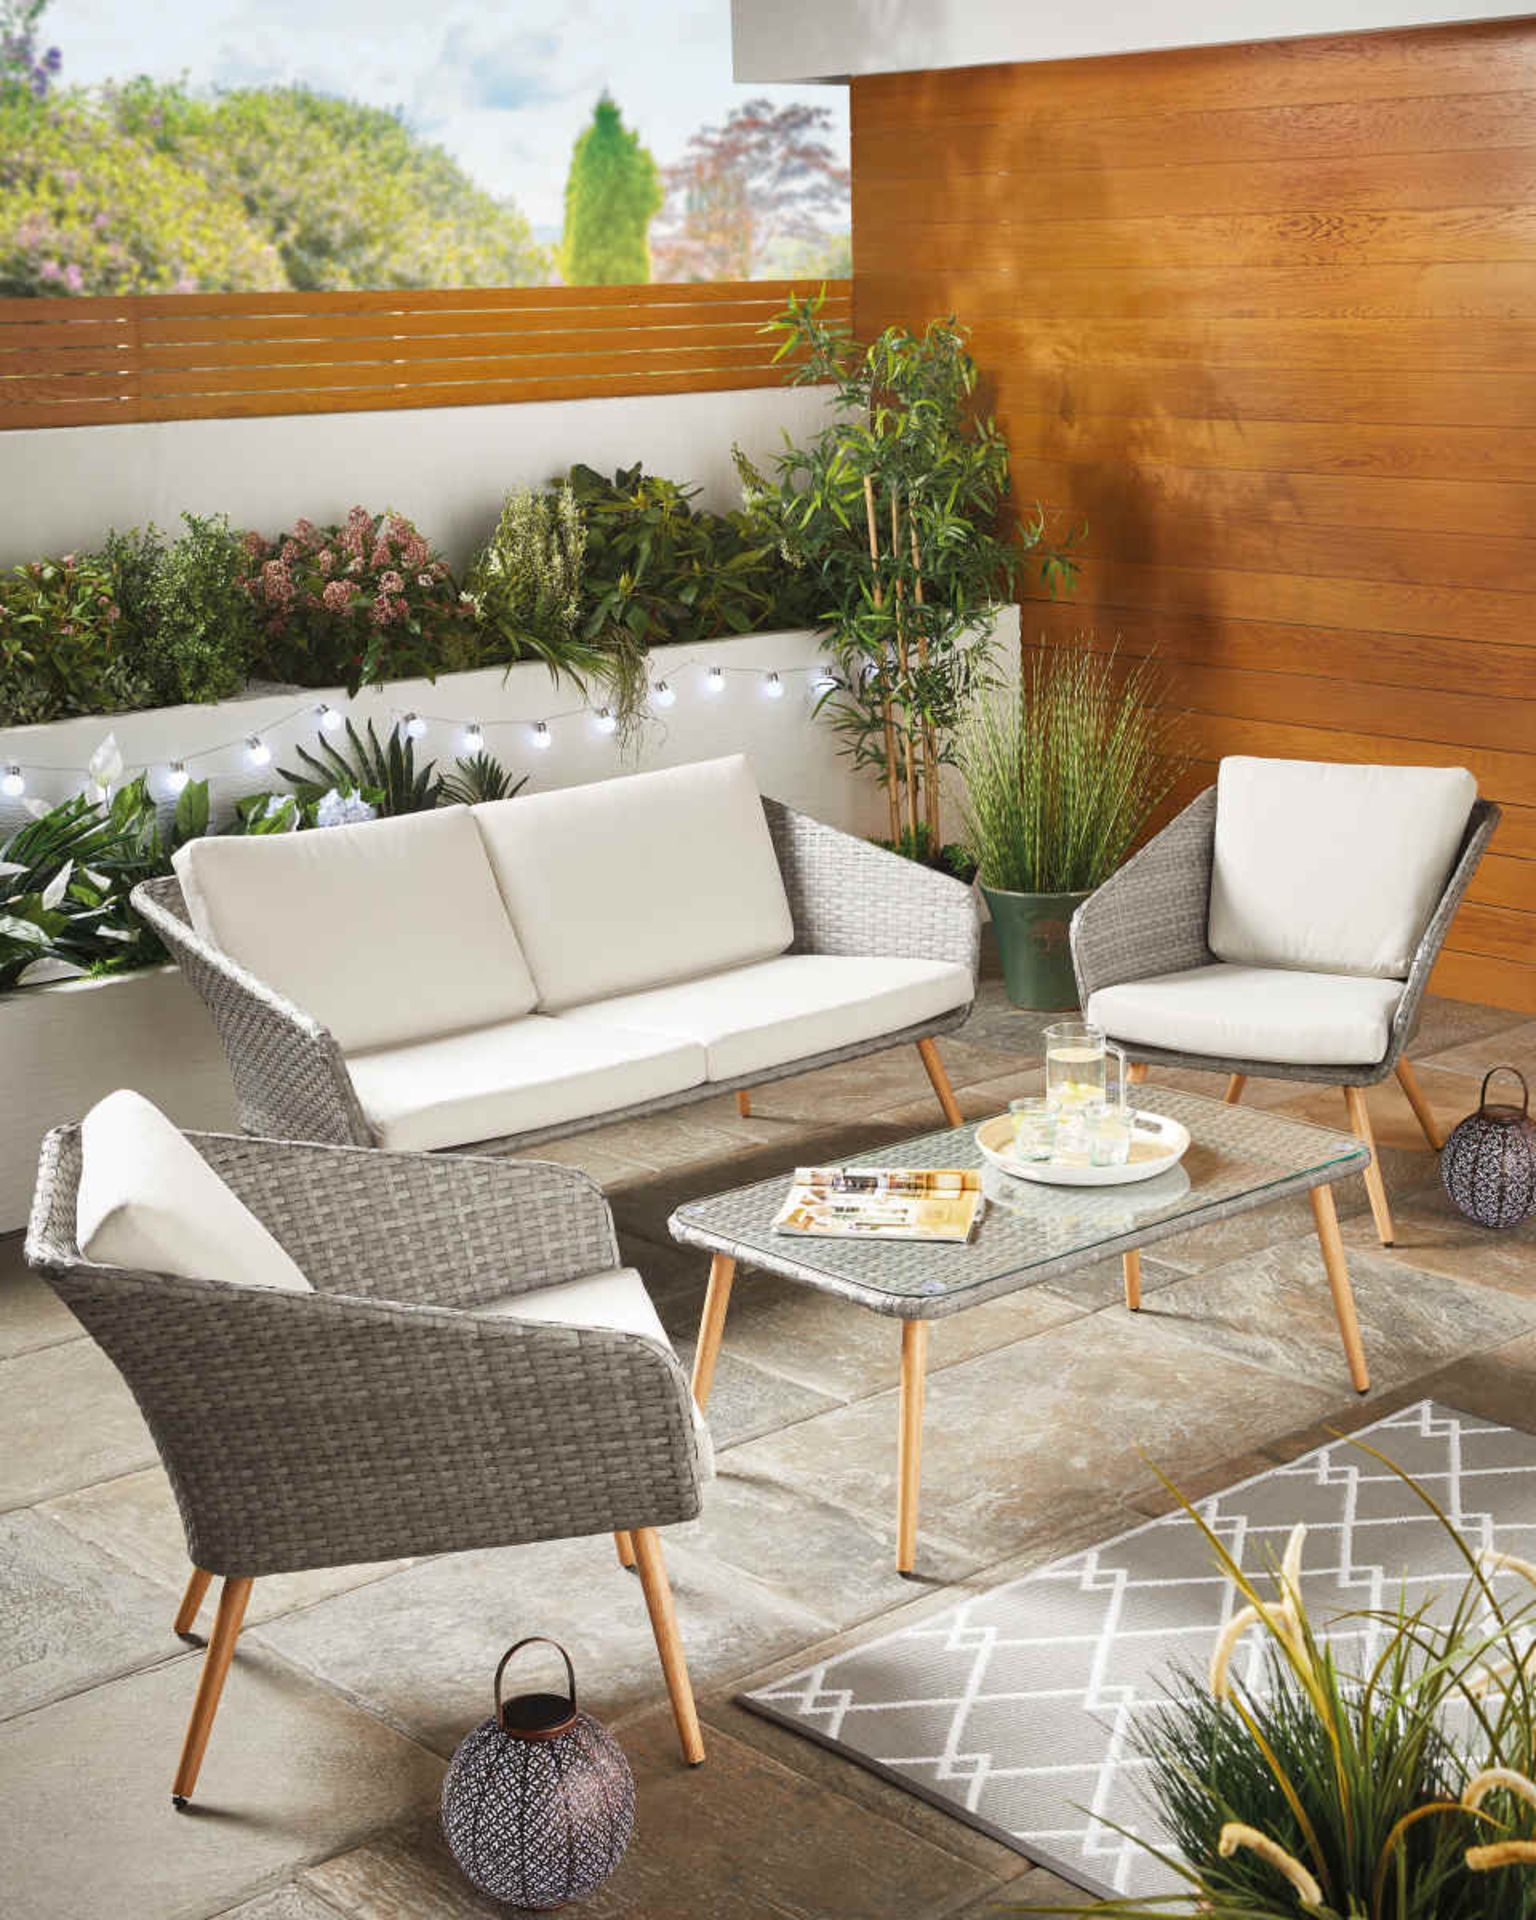 4 Piece Rope Wicker Sofa Set. (ROW14TOP) Comfortable and relaxing weather resistant cushions Can - Image 4 of 4